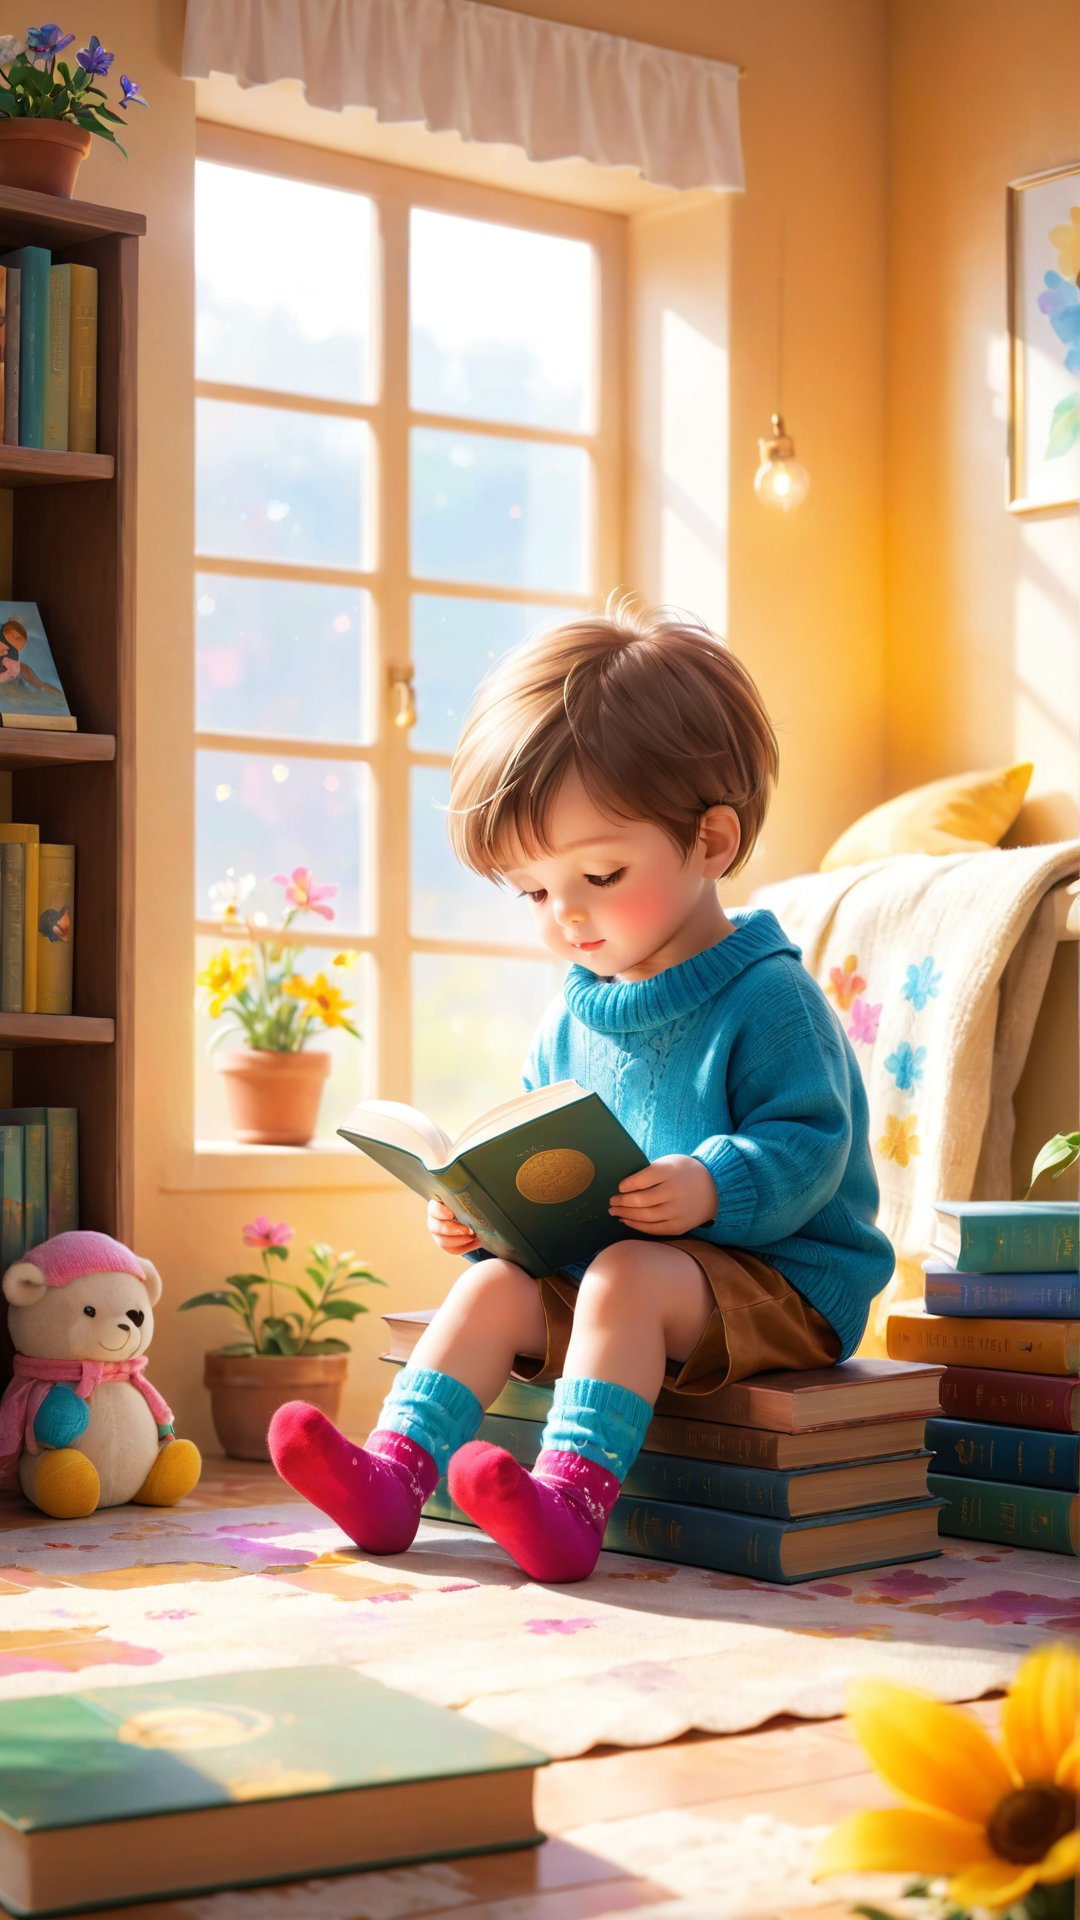 Flowers bloom bokeh background, flowers blooming, painting on the wall, books room, A heartwarming image of a young child sitting on the floor, completely engrossed in a book. The child is wearing a cozy sweater with a pair of colorful socks dangling off their feet. The book they're reading is an old, leather-bound classic with a worn leather cover and frayed edges. The room is bathed in warm, golden sunlight, creating a serene and inviting atmosphere.